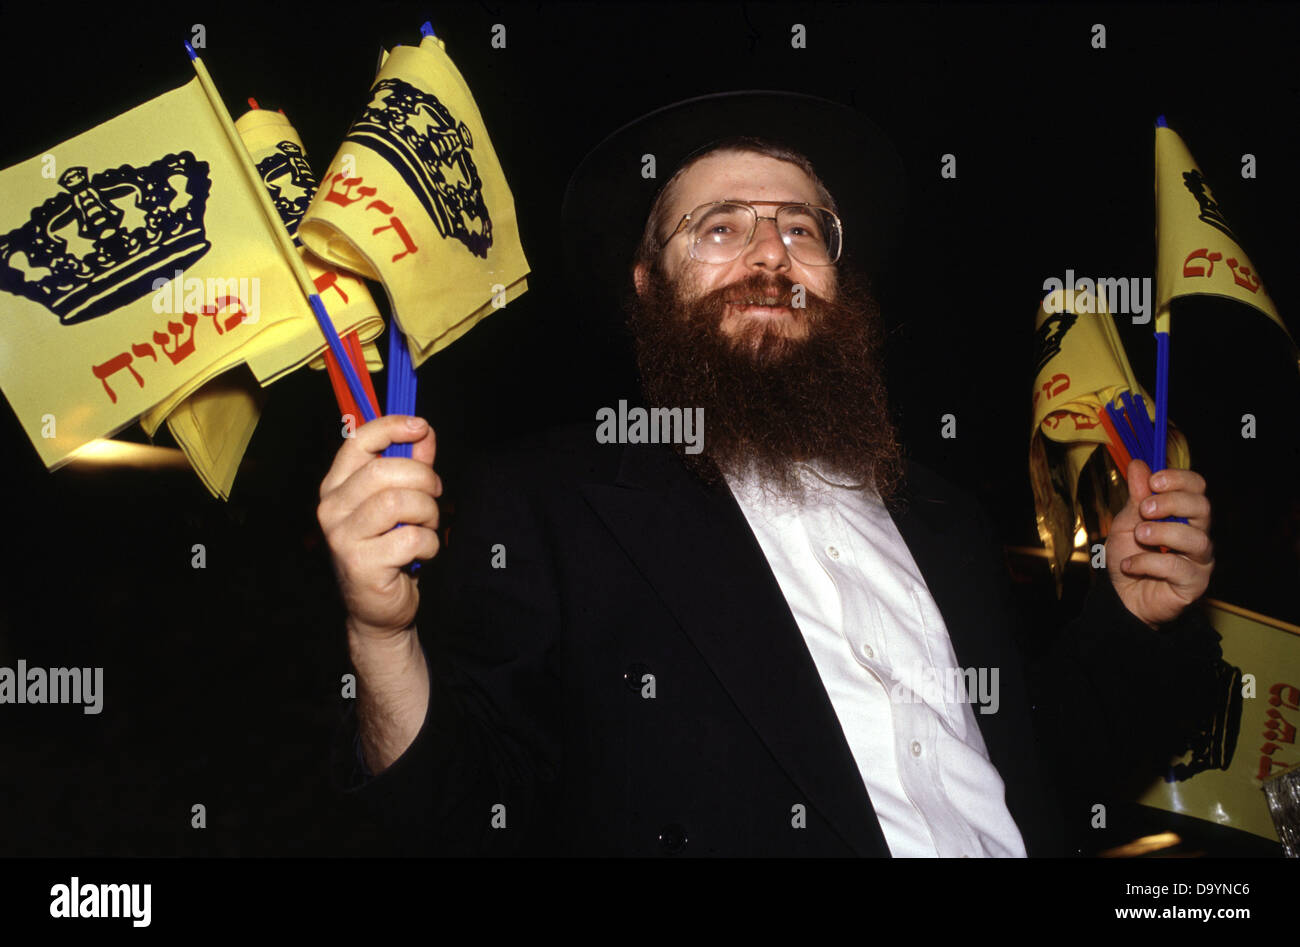 An Orthodox Jew from the Habad Lubavitch movement selling Flags that reads 'Messiah' in Israel Stock Photo